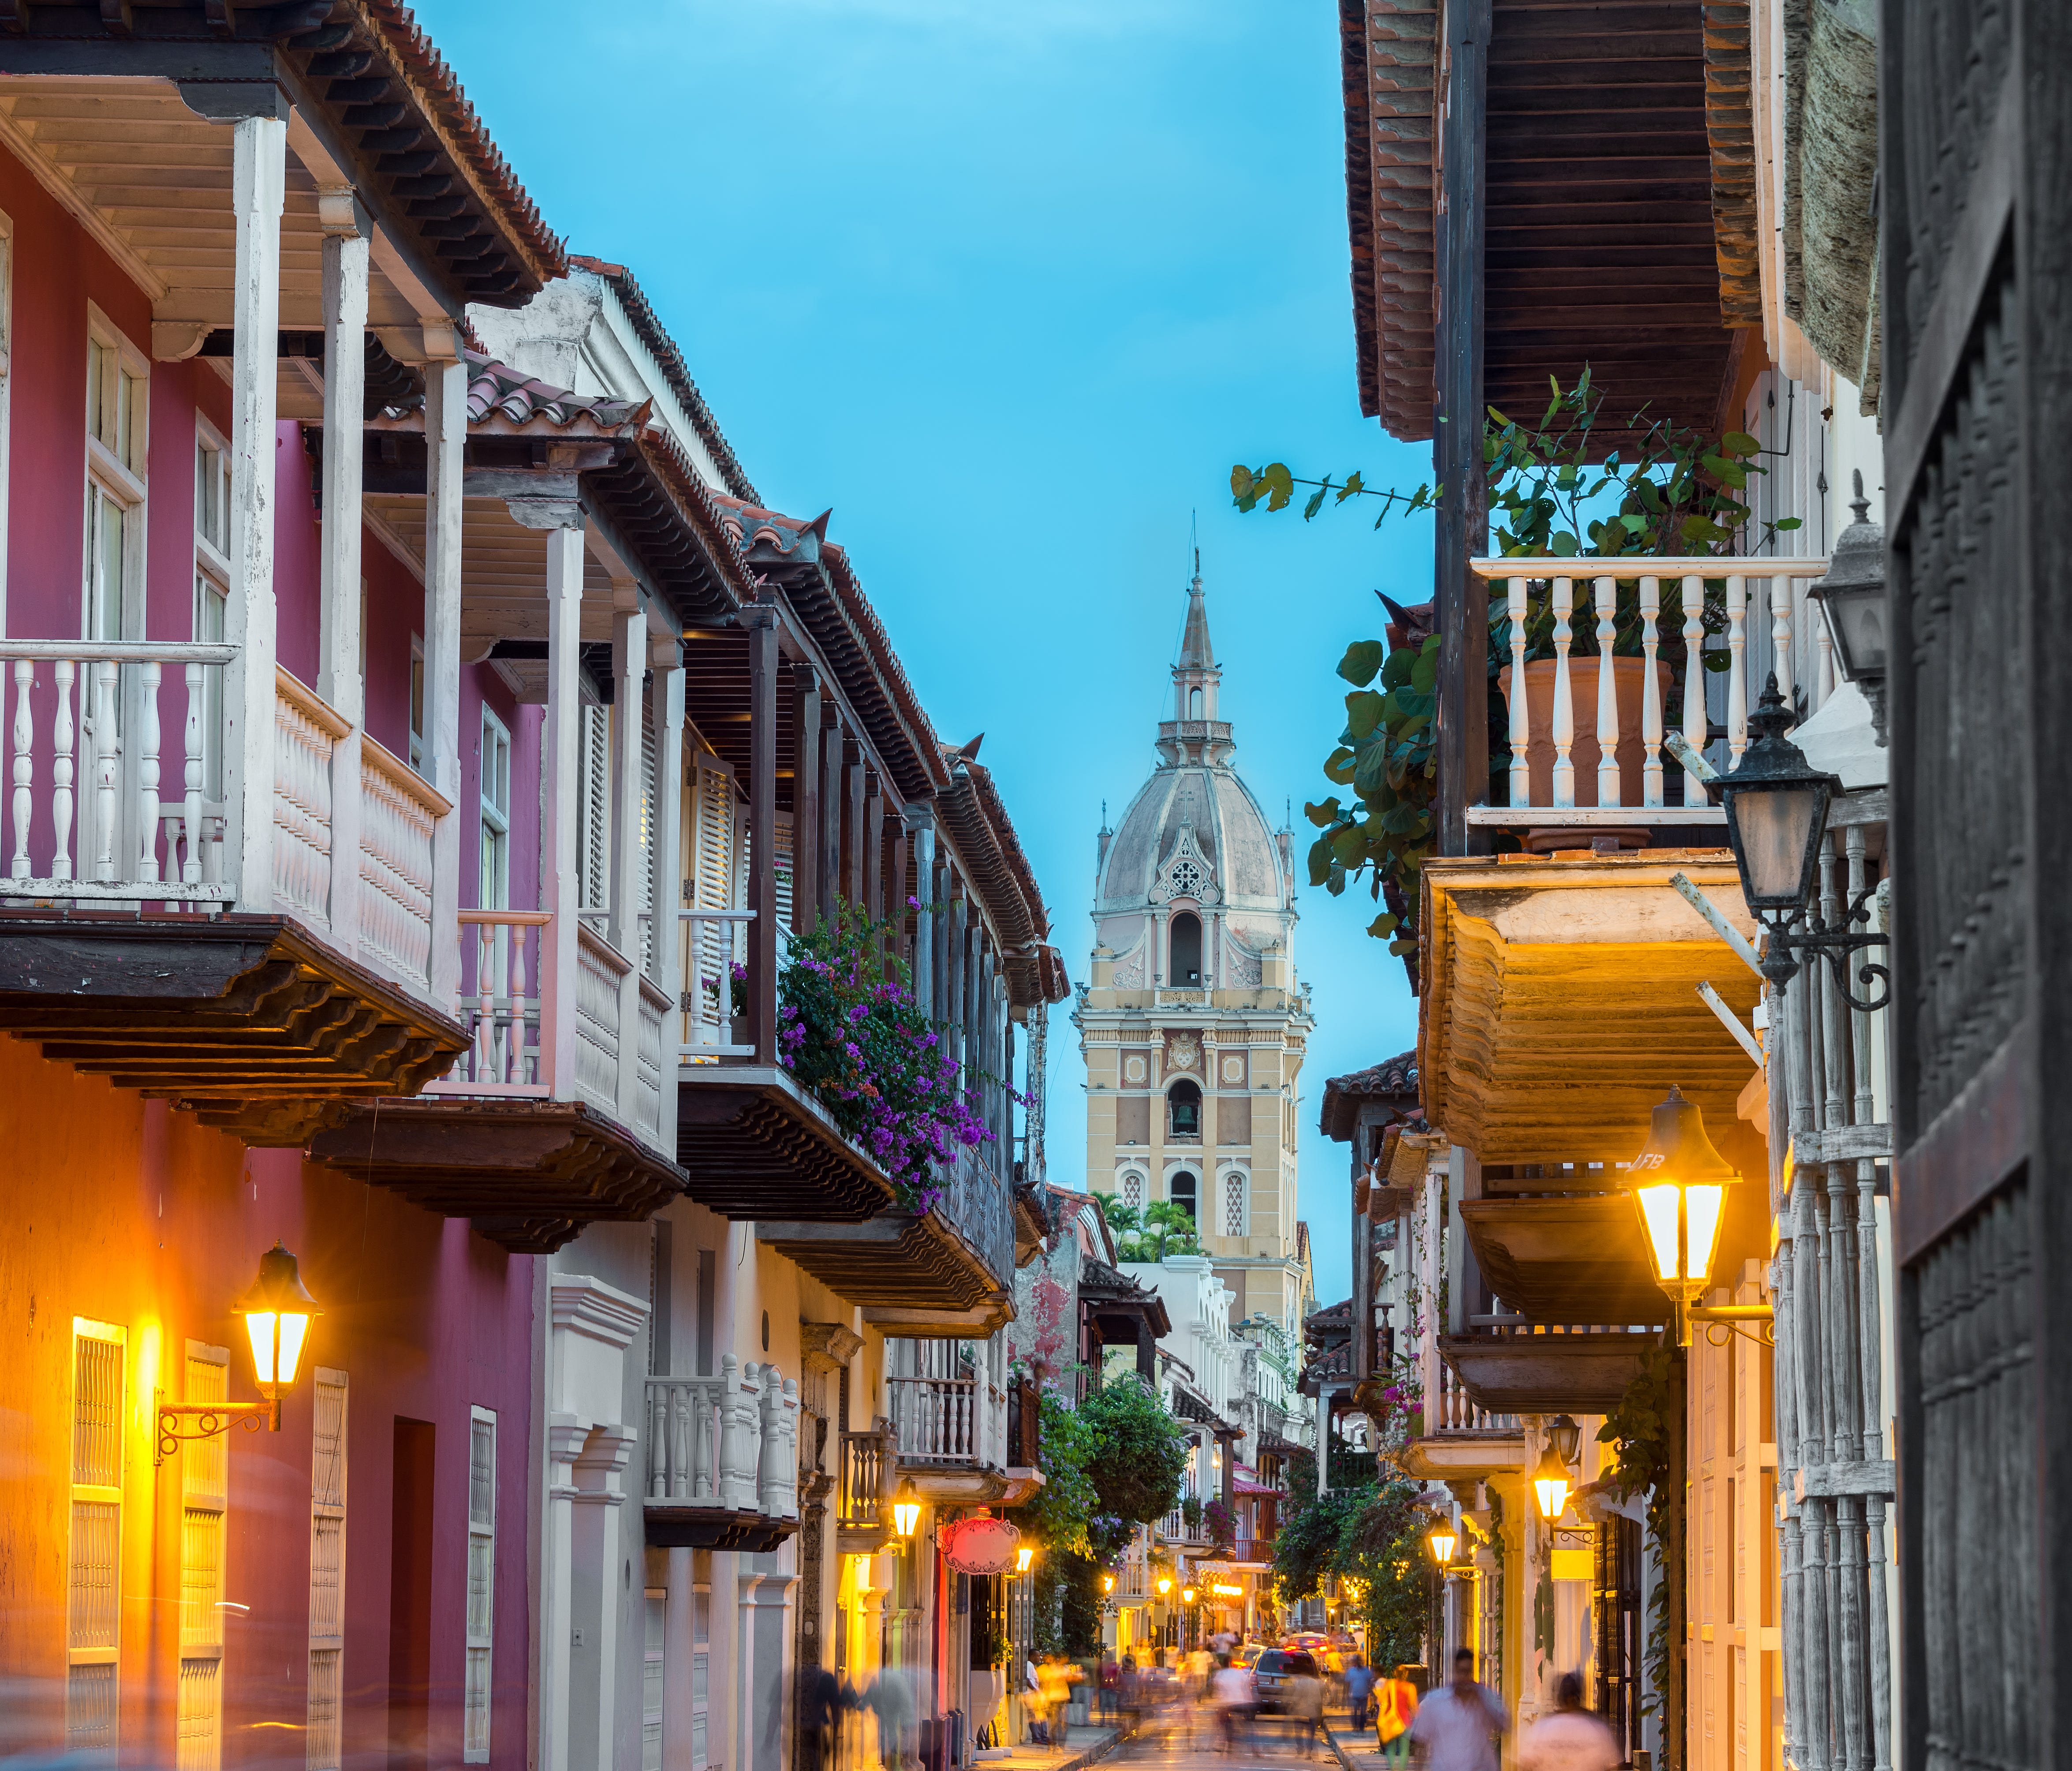 Cartagena is one of Colombia's most romantic cities.